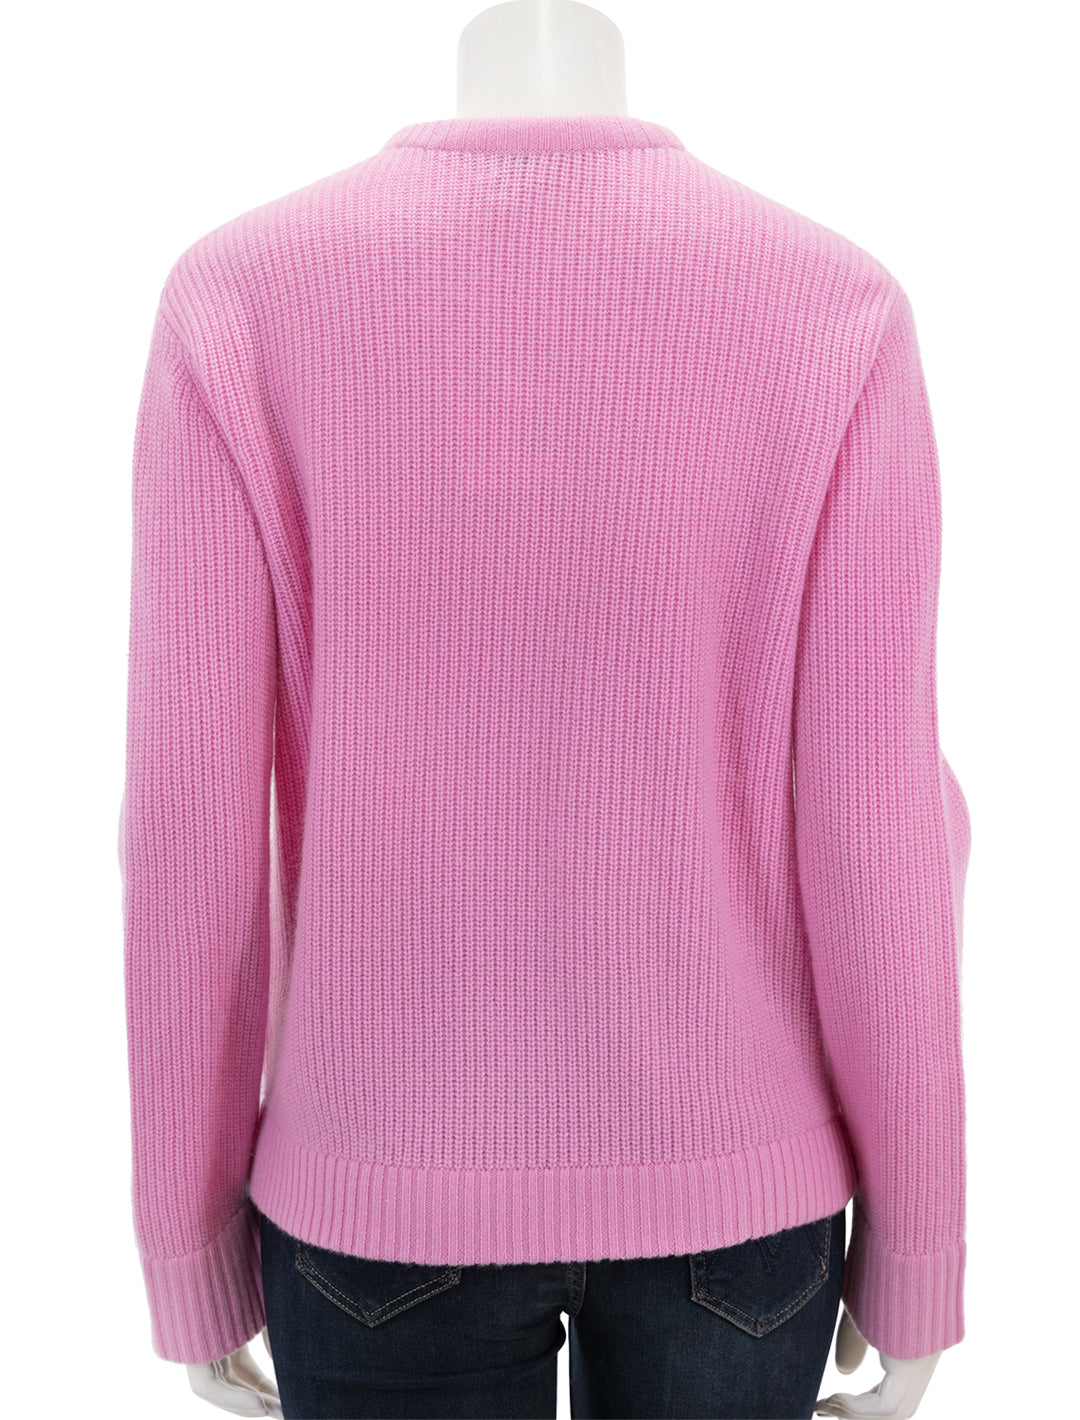 Back view of KULE's the alden sweater in pink.